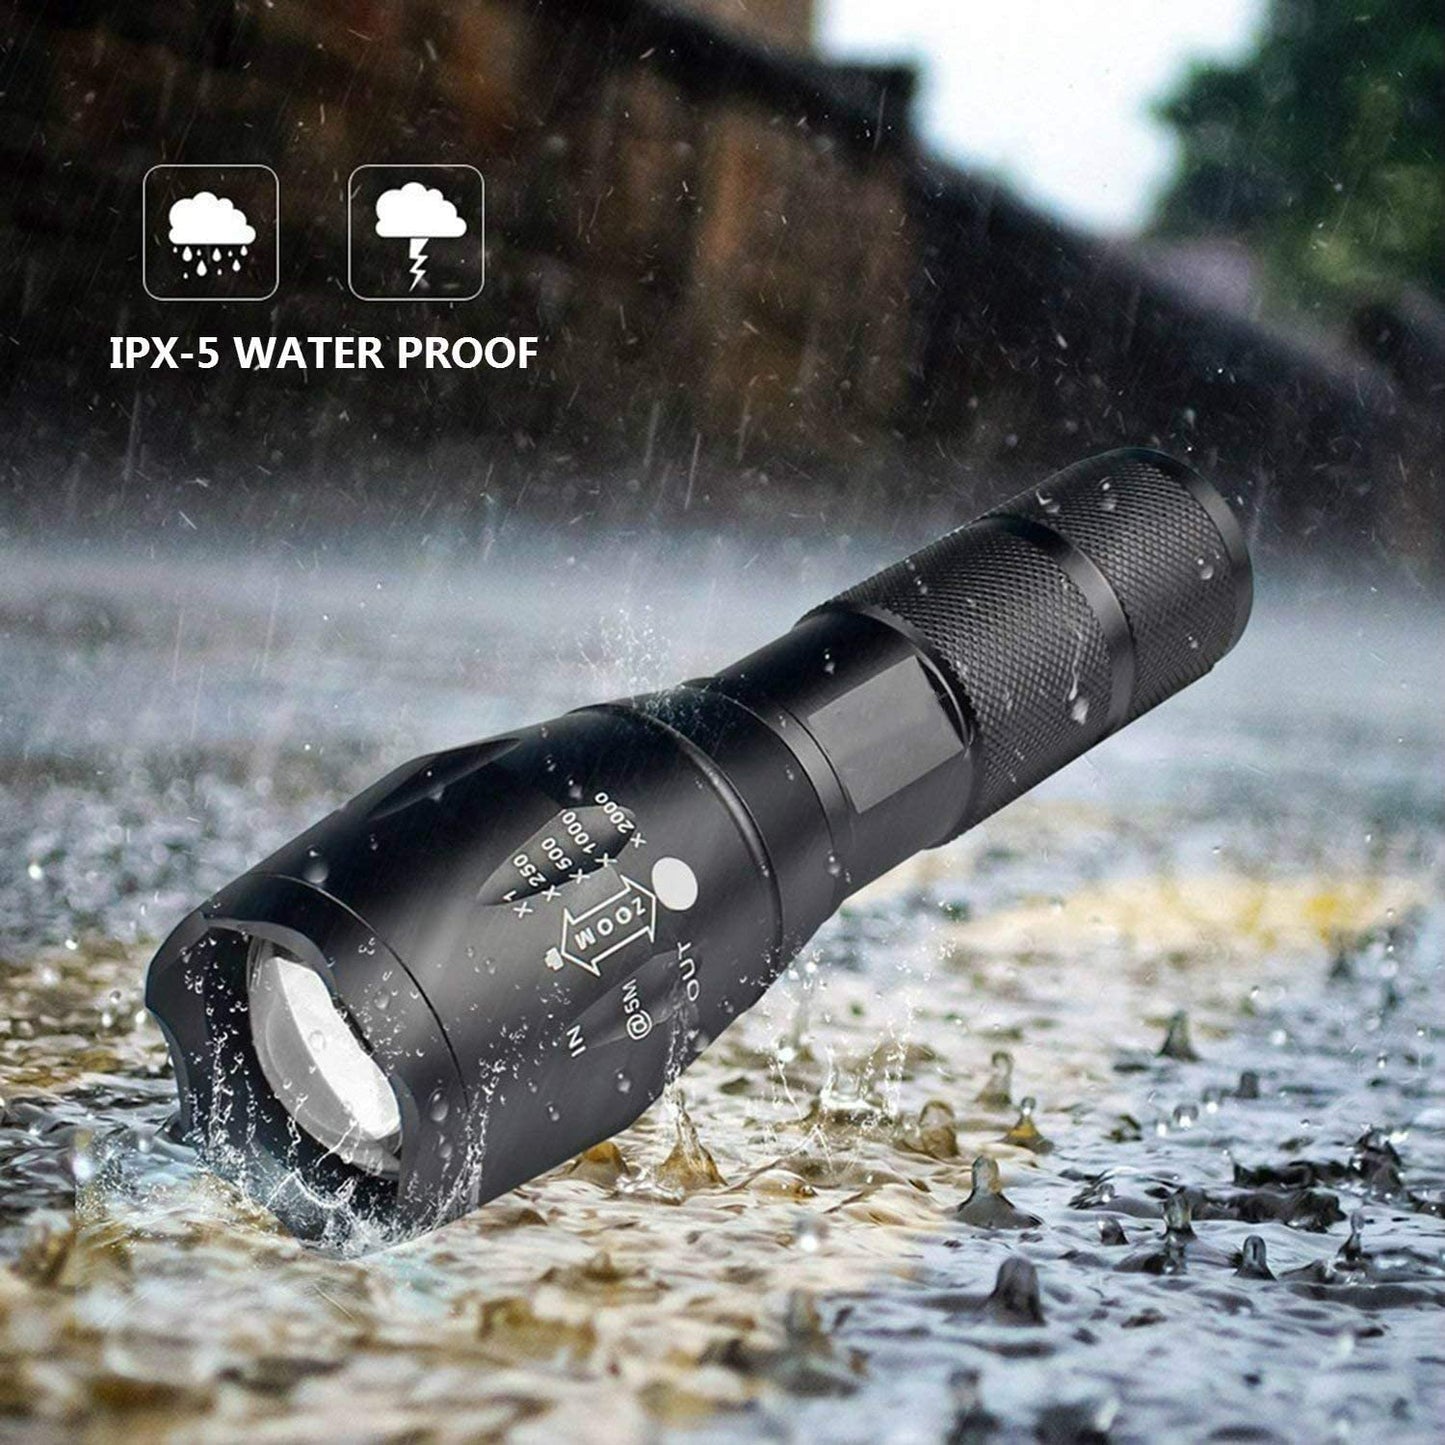 Powerful T6 LED Flashlight Super Bright Aluminum Alloy Portable Torch USB Rechargeable Outdoor Camping Tactical Flash Light